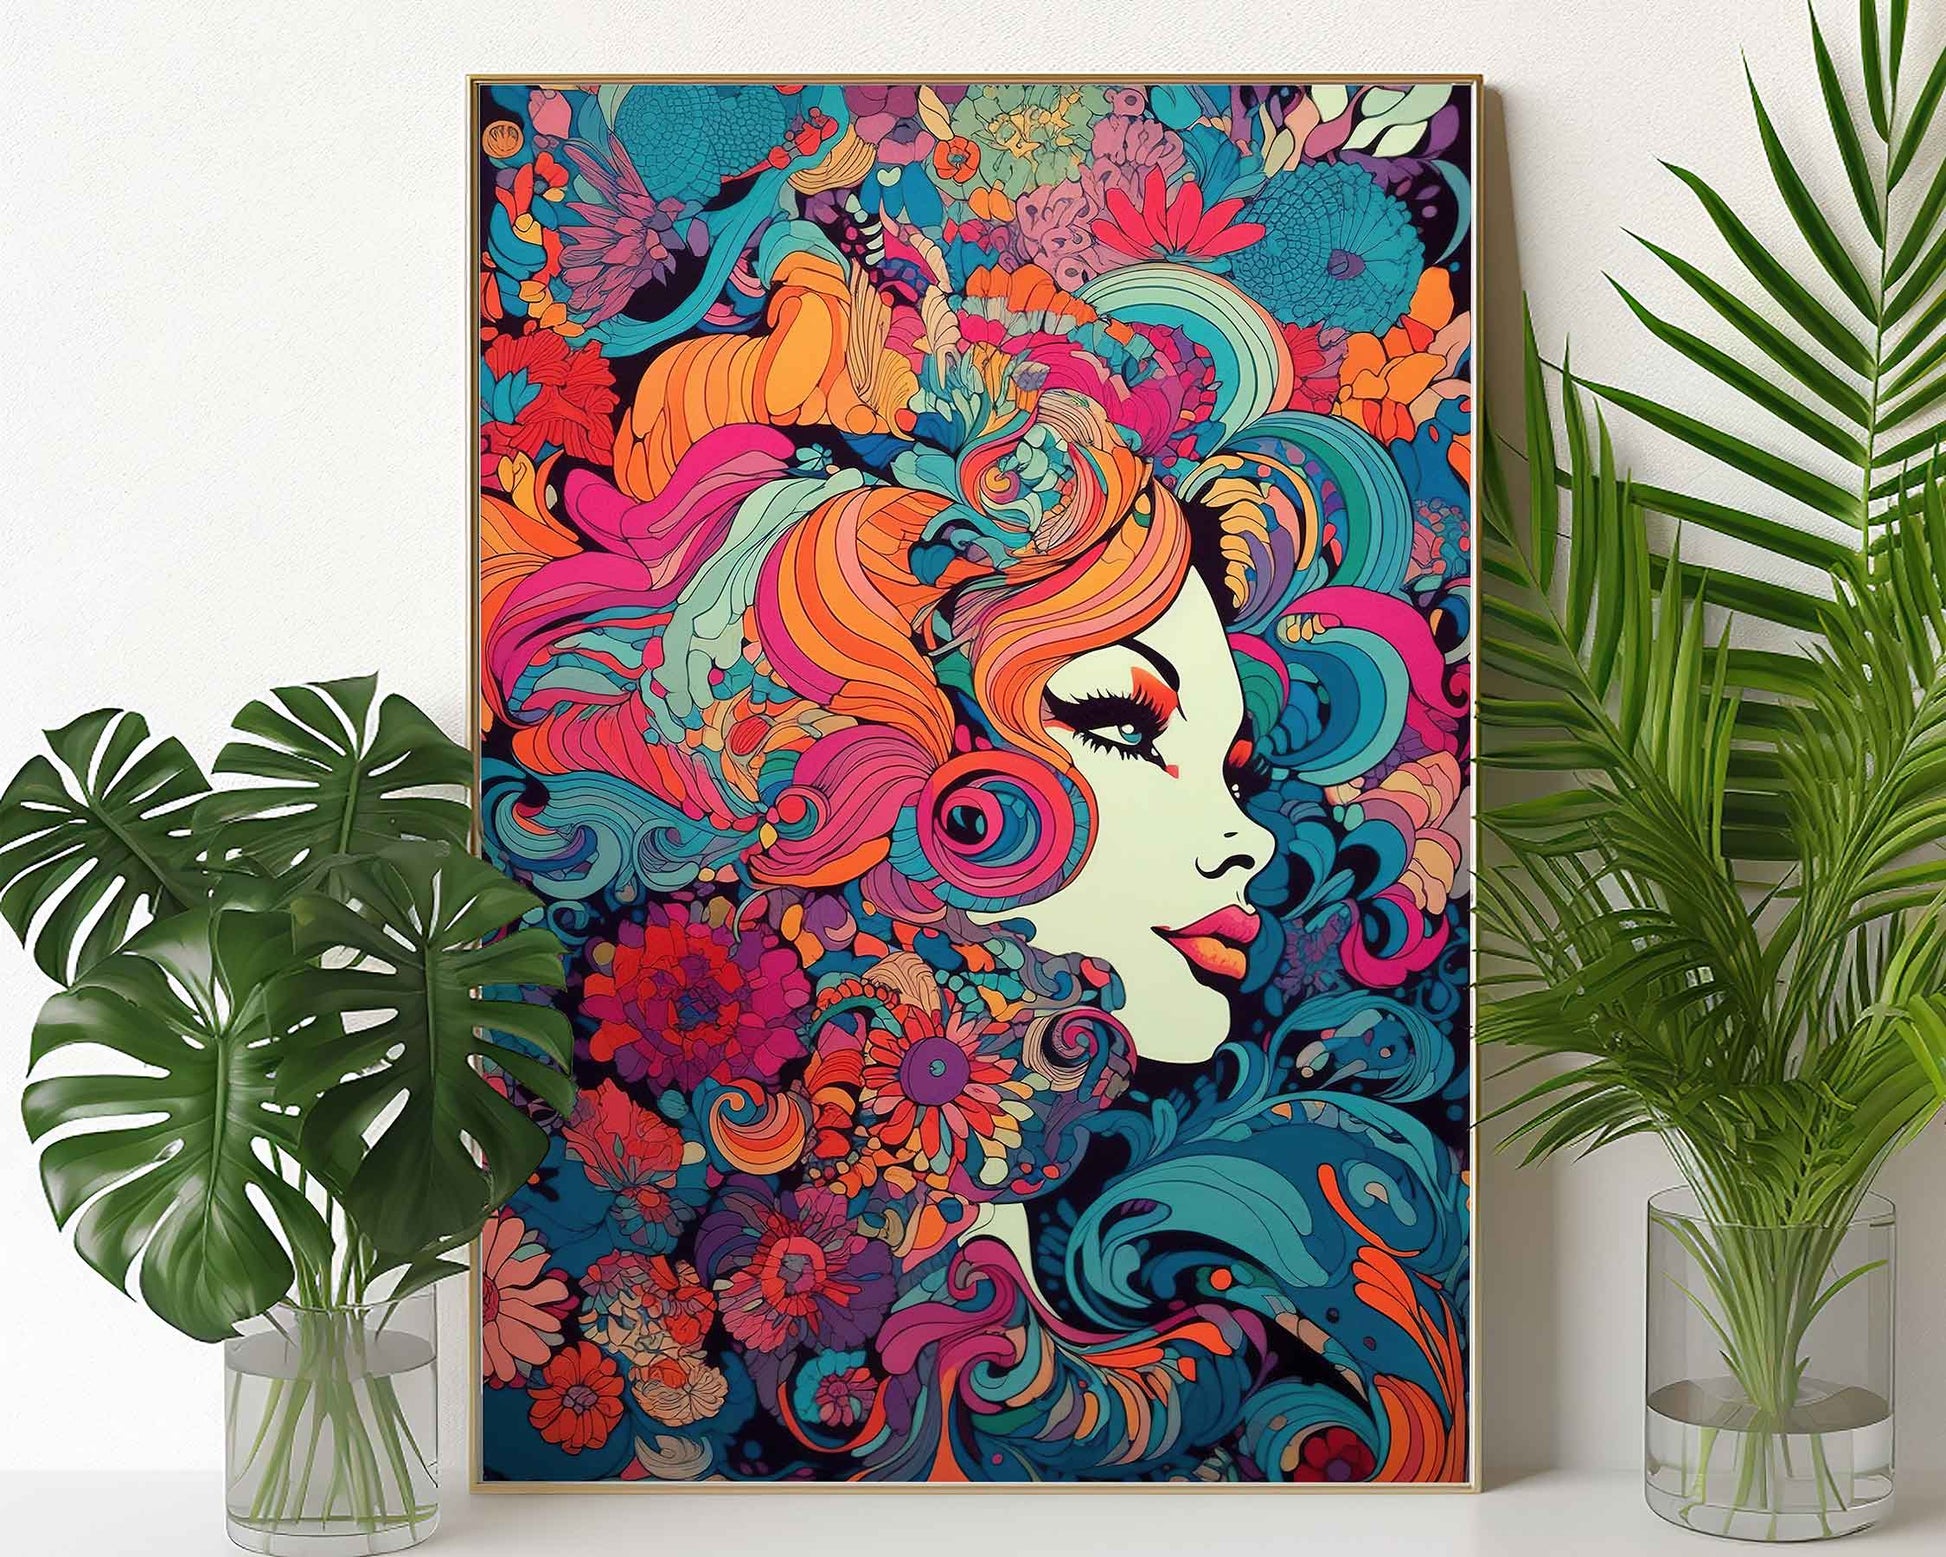 Framed Image of Art Nouveau Vintage Parisian 70s Psychedelic Wall Art Poster Print